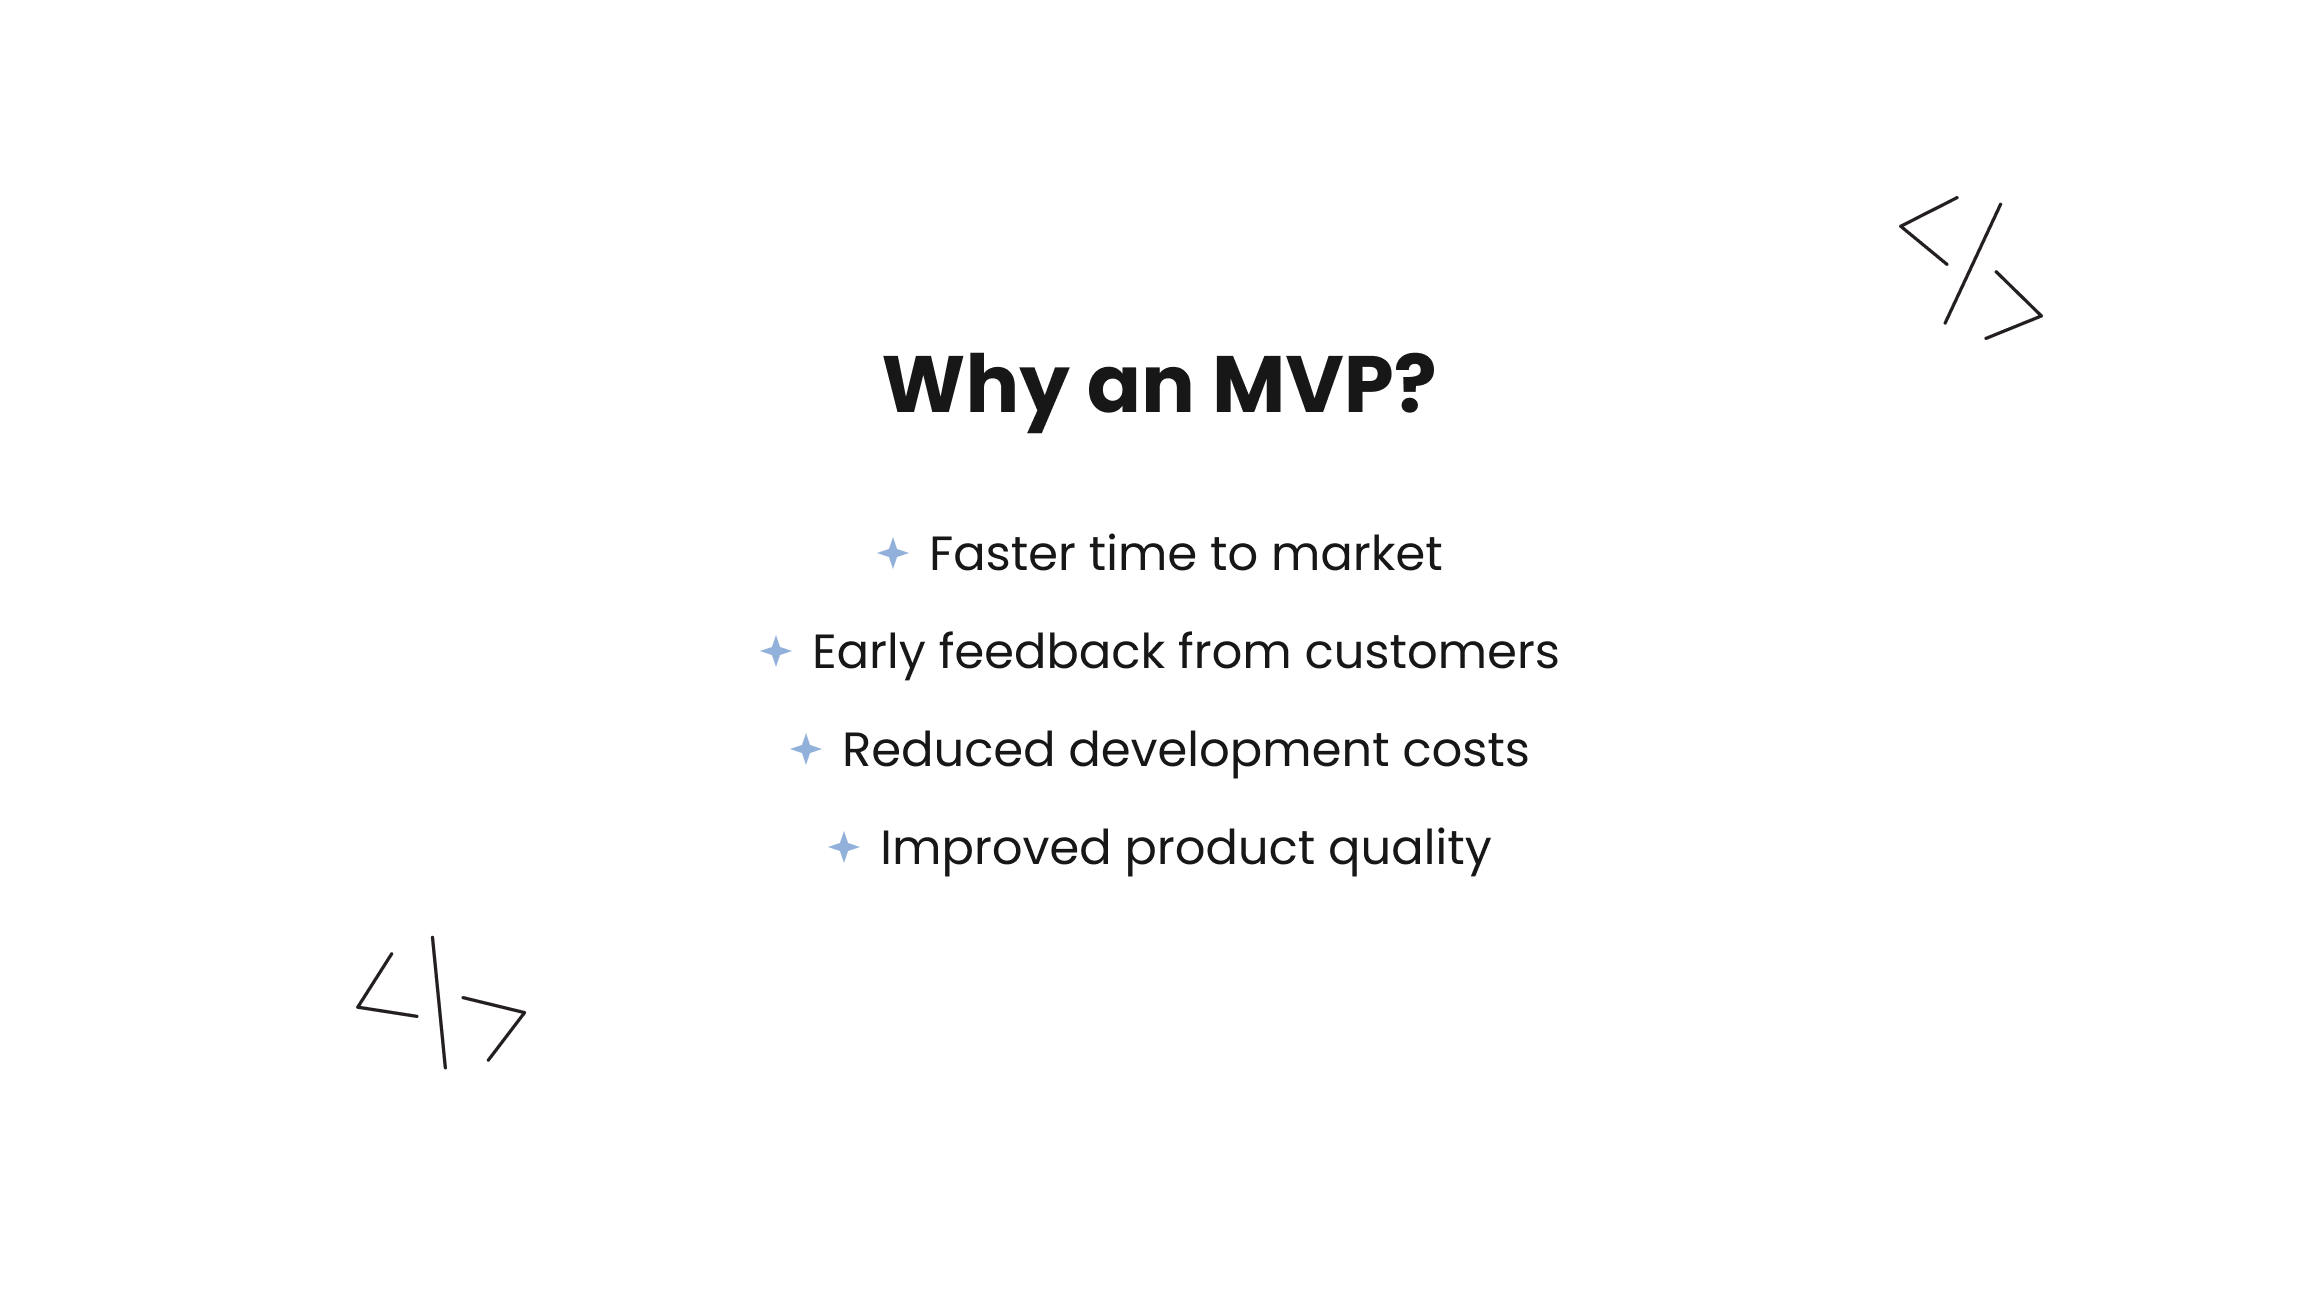 The benefits of an MVP in Agile development